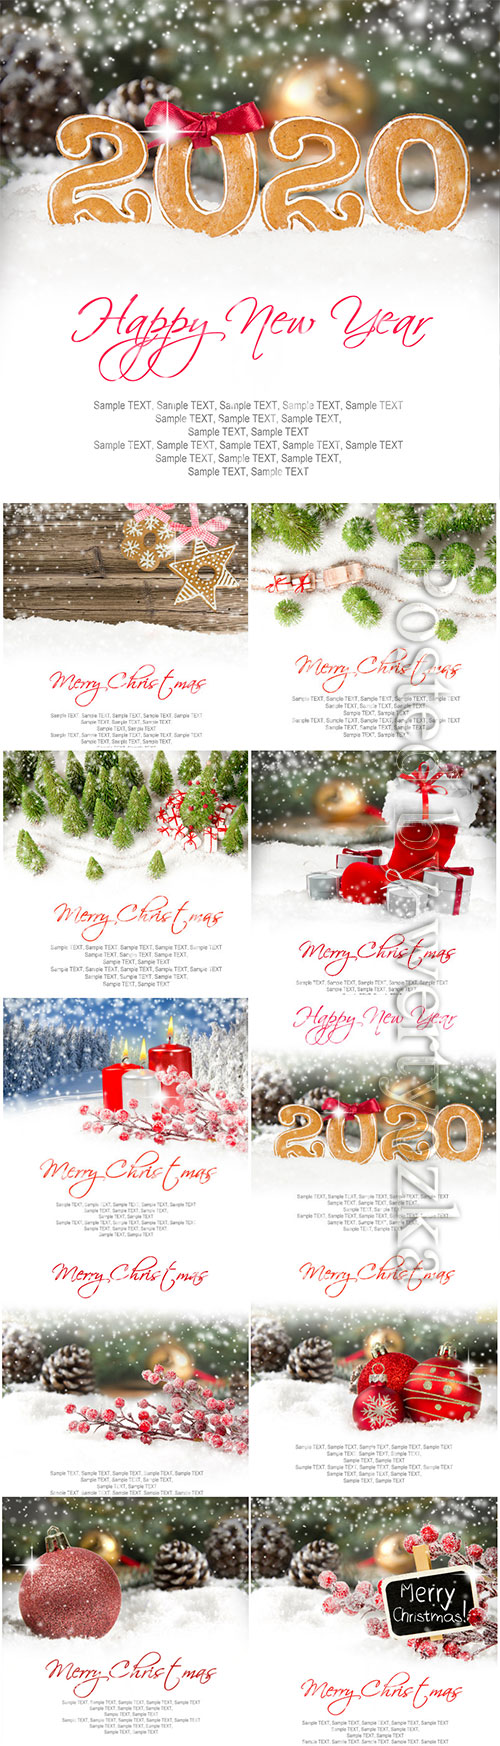 Christmas banners with fir branches, candles, gifts and Christmas decorations